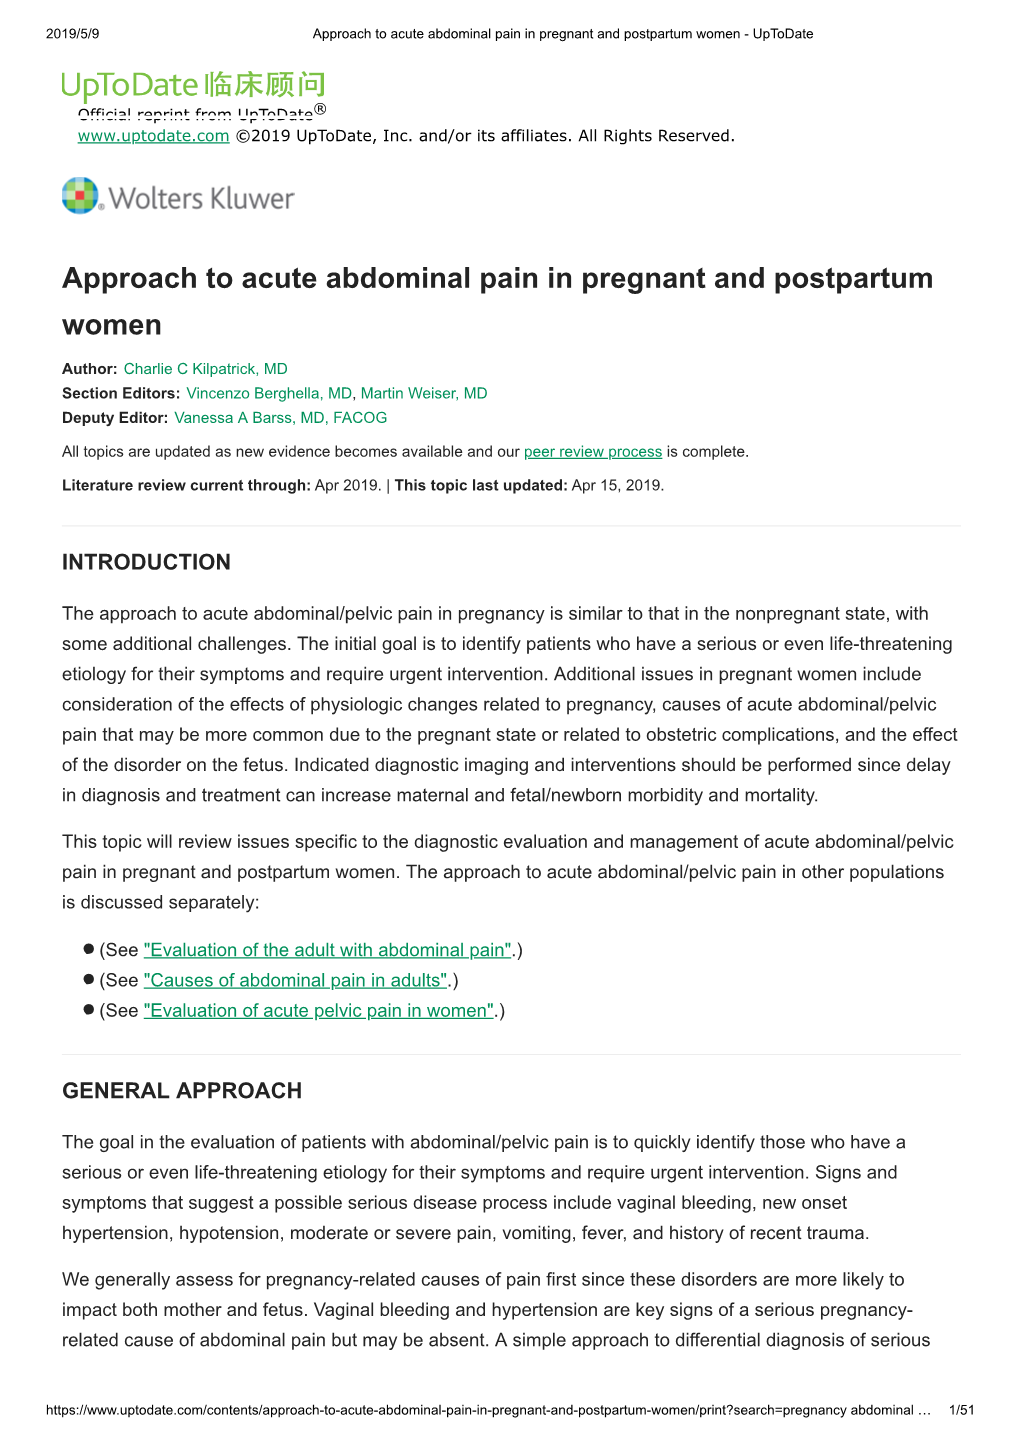 Approach to Acute Abdominal Pain in Pregnant and Postpartum Women - Uptodate